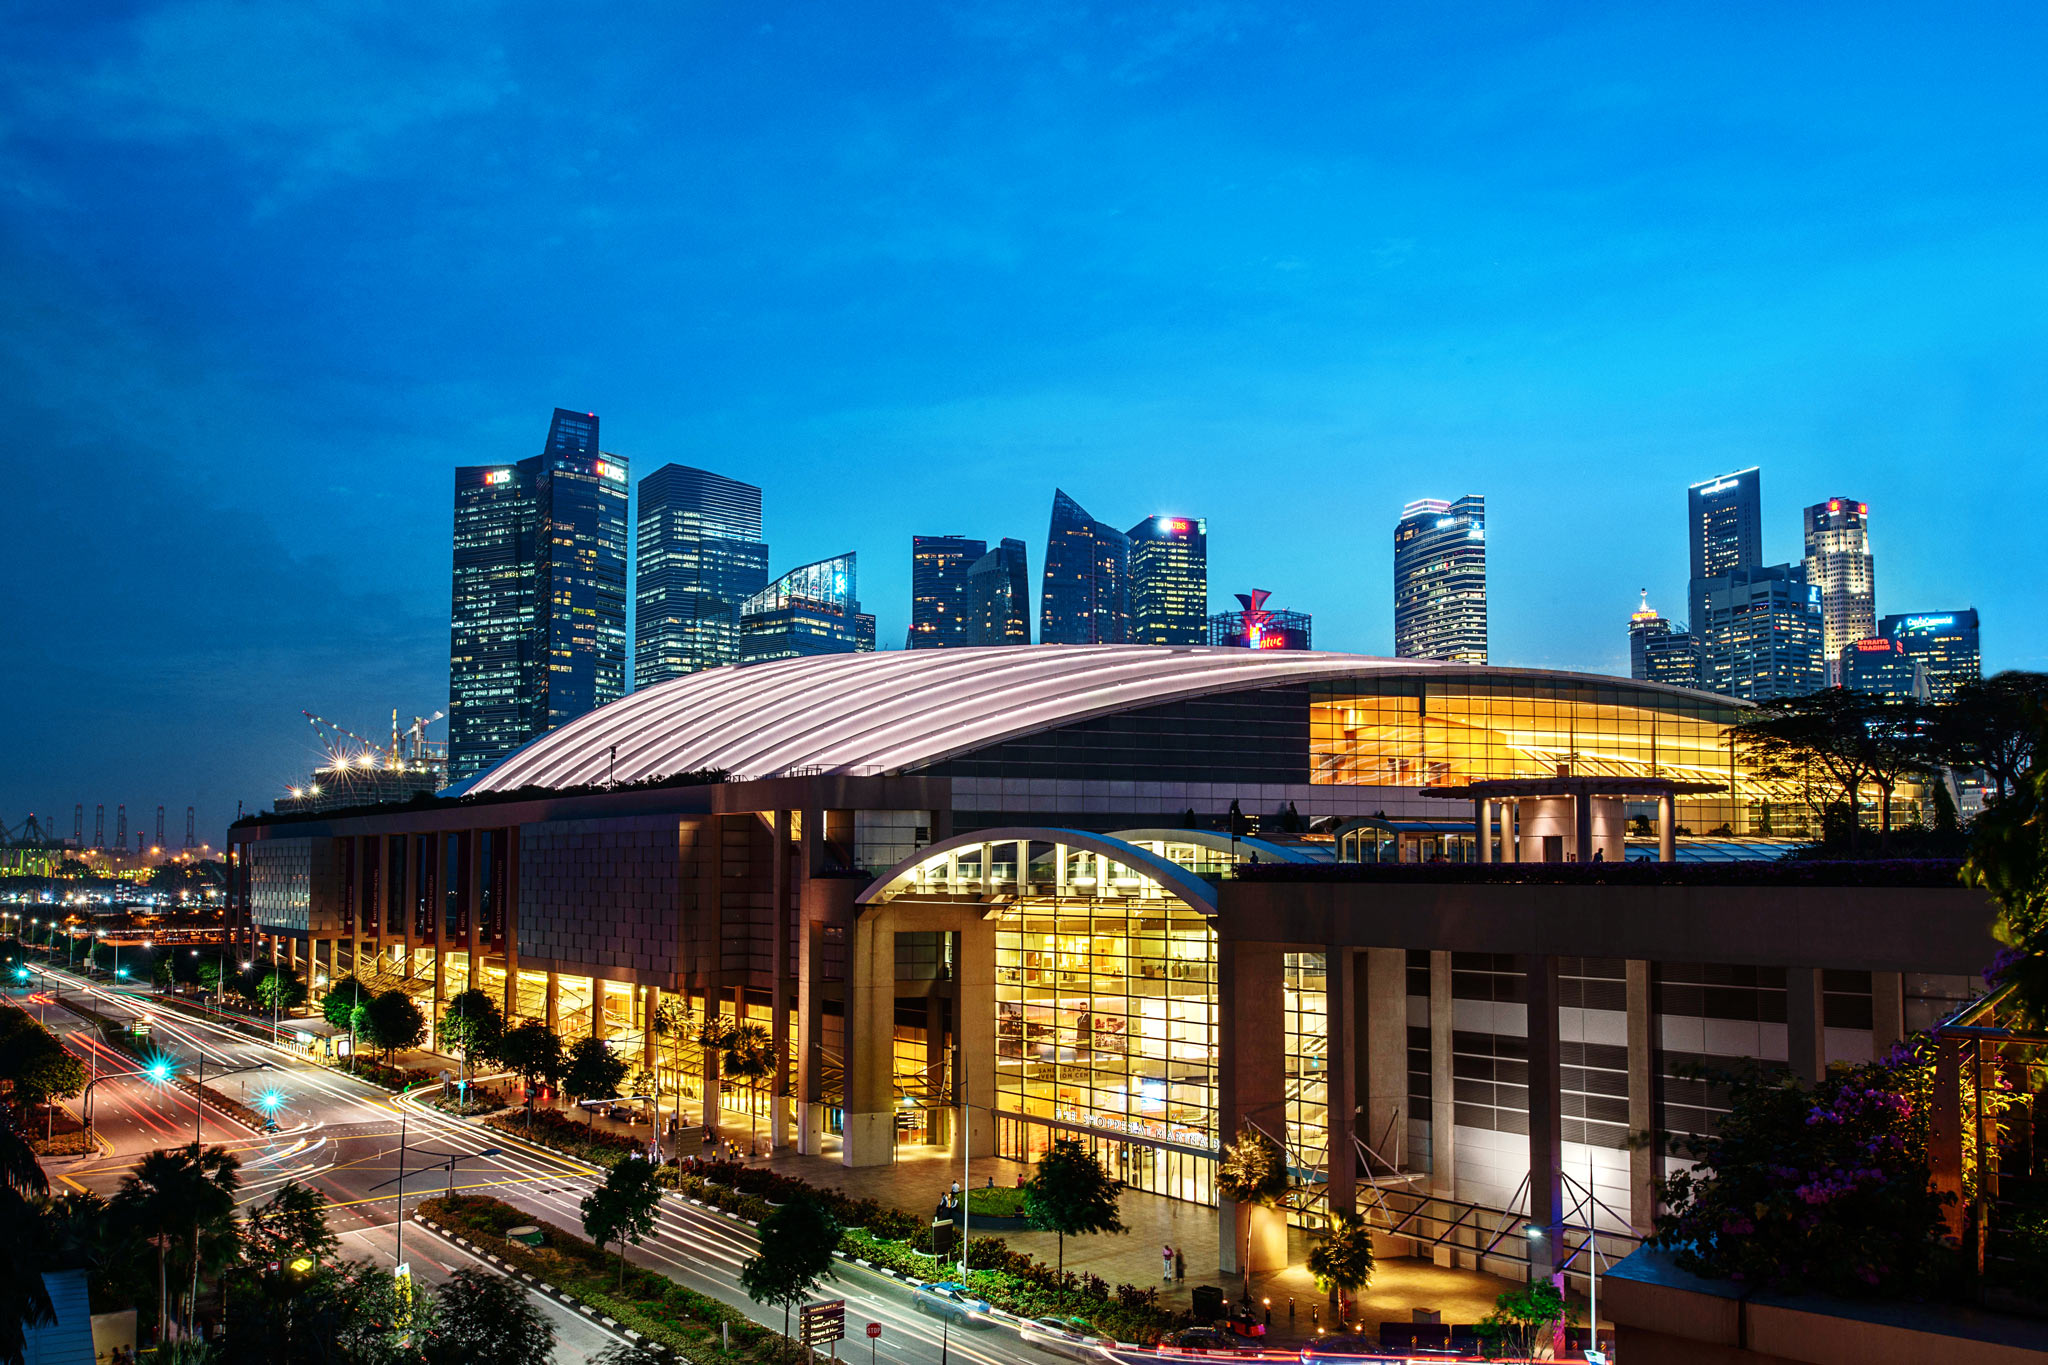 Sands Expo and Convention Centre at Marina Bay Sands Singapore